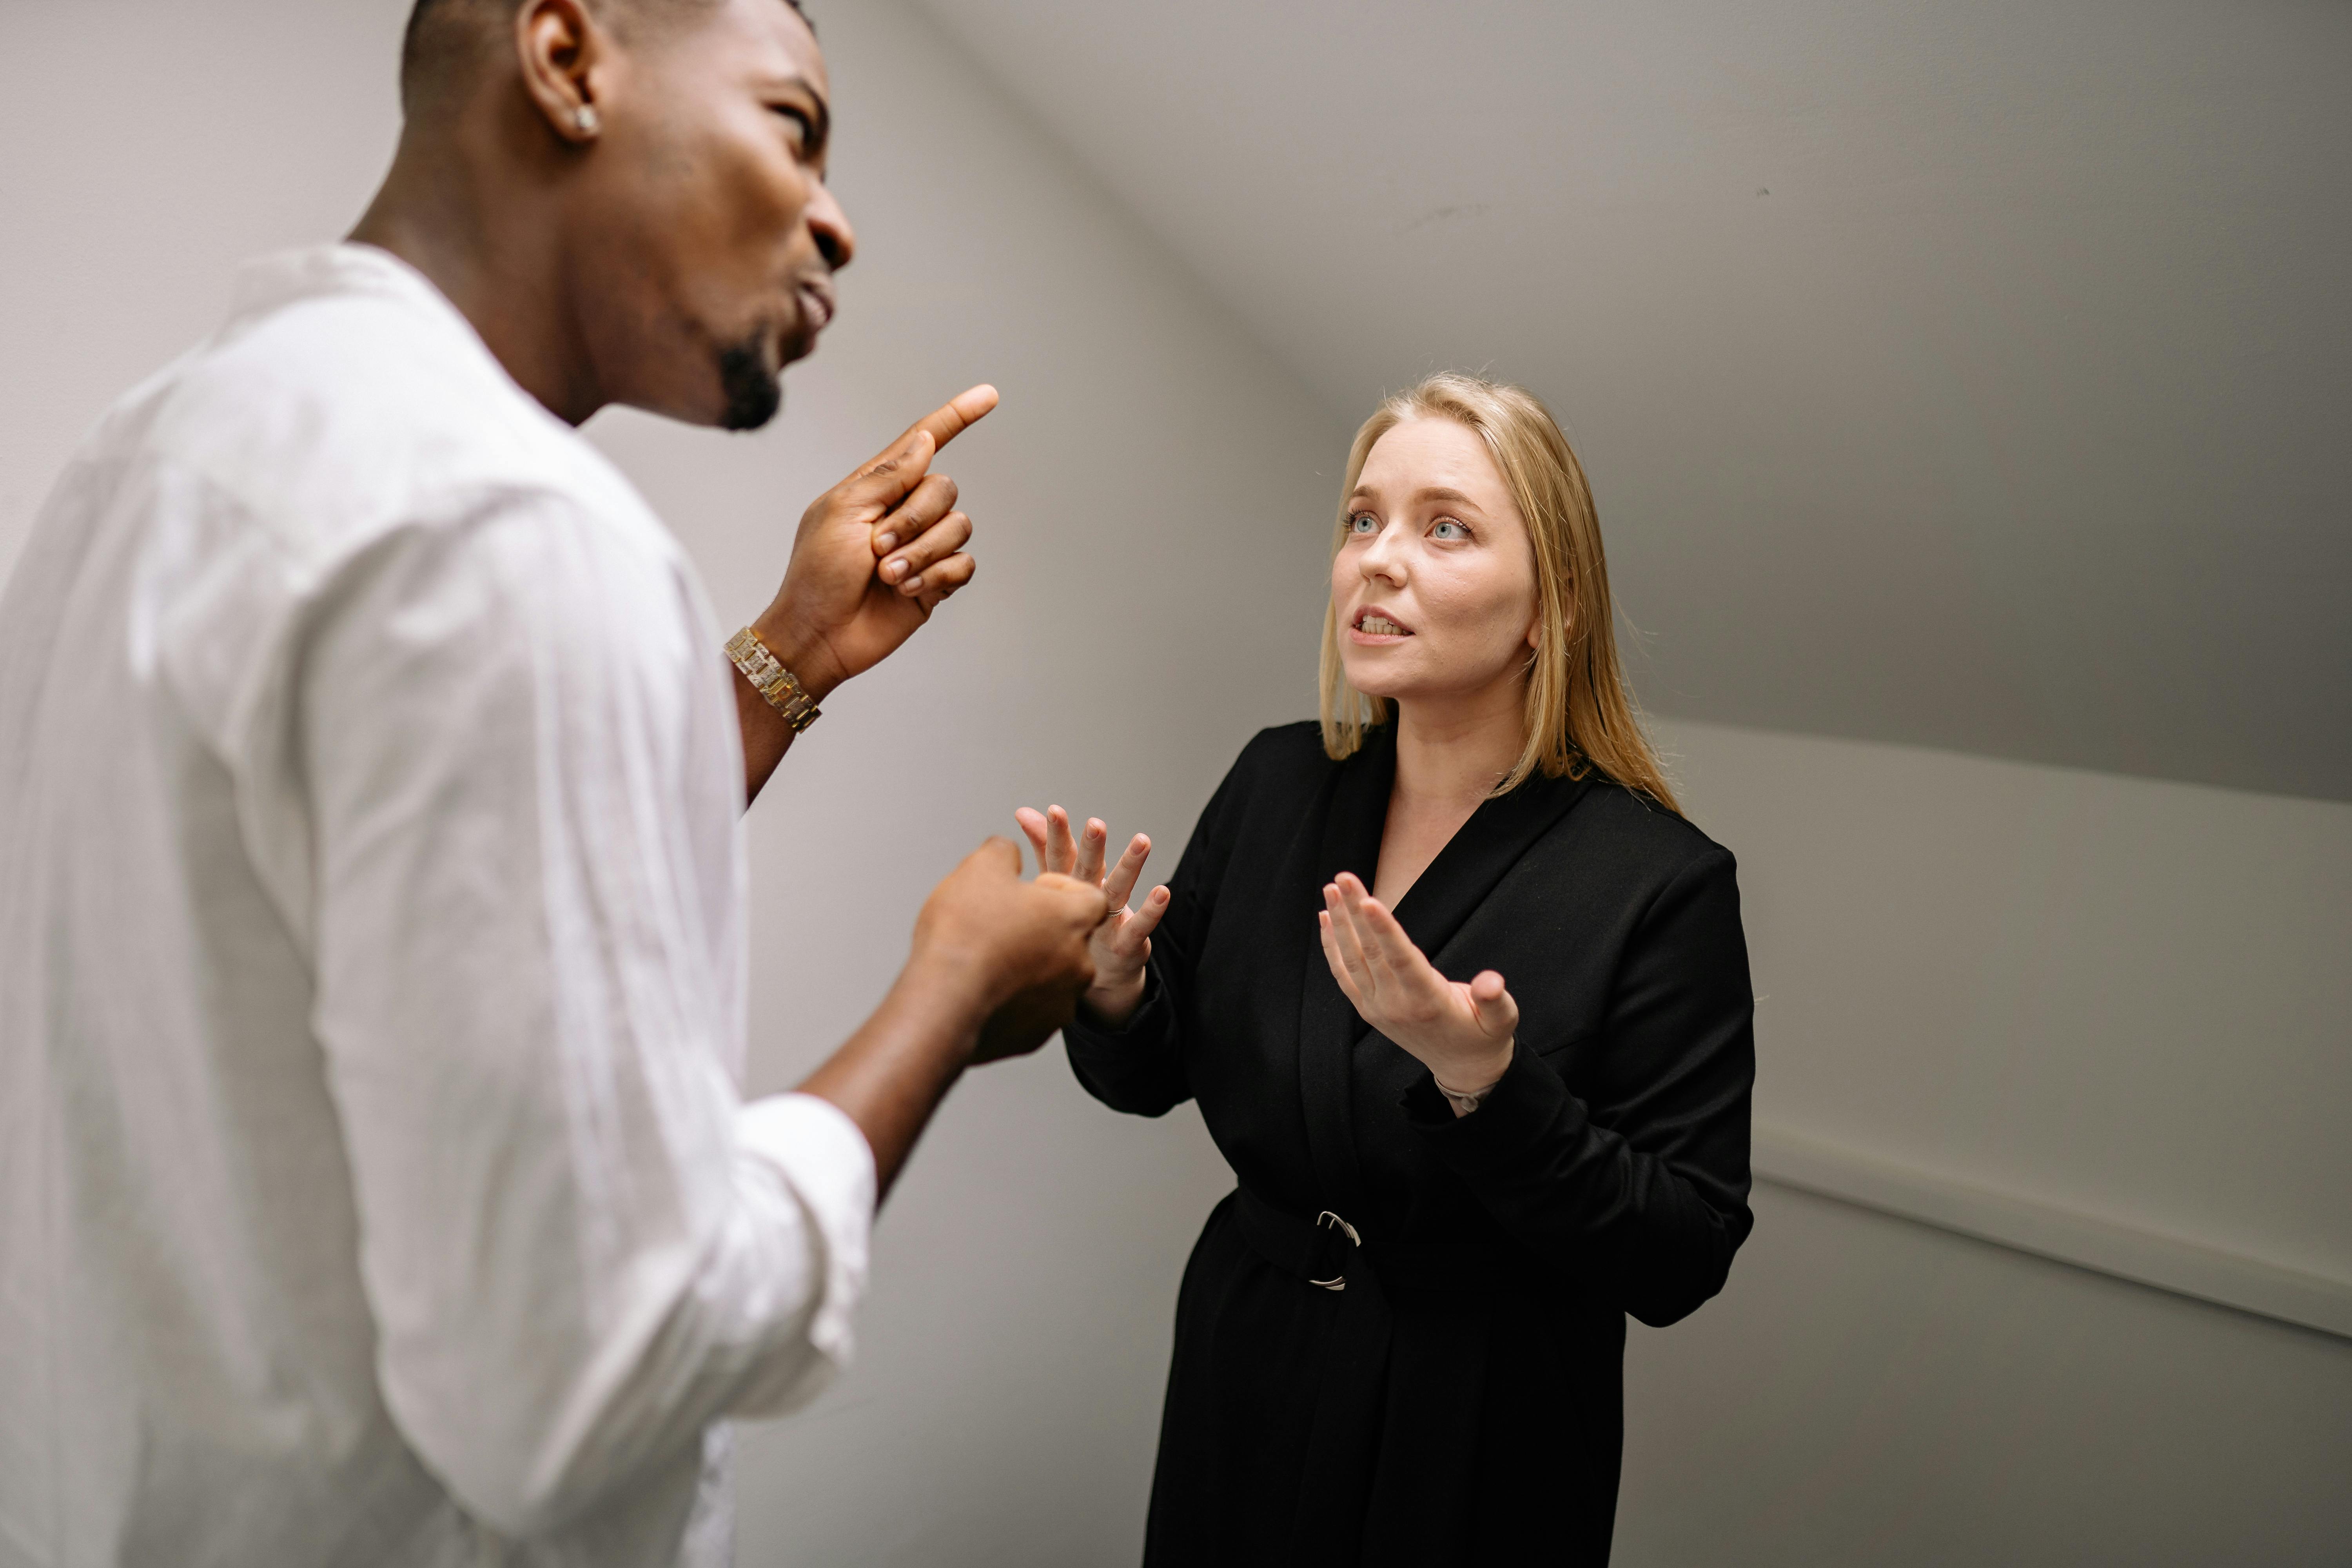 A man disagreeing with a woman | Source: Pexels